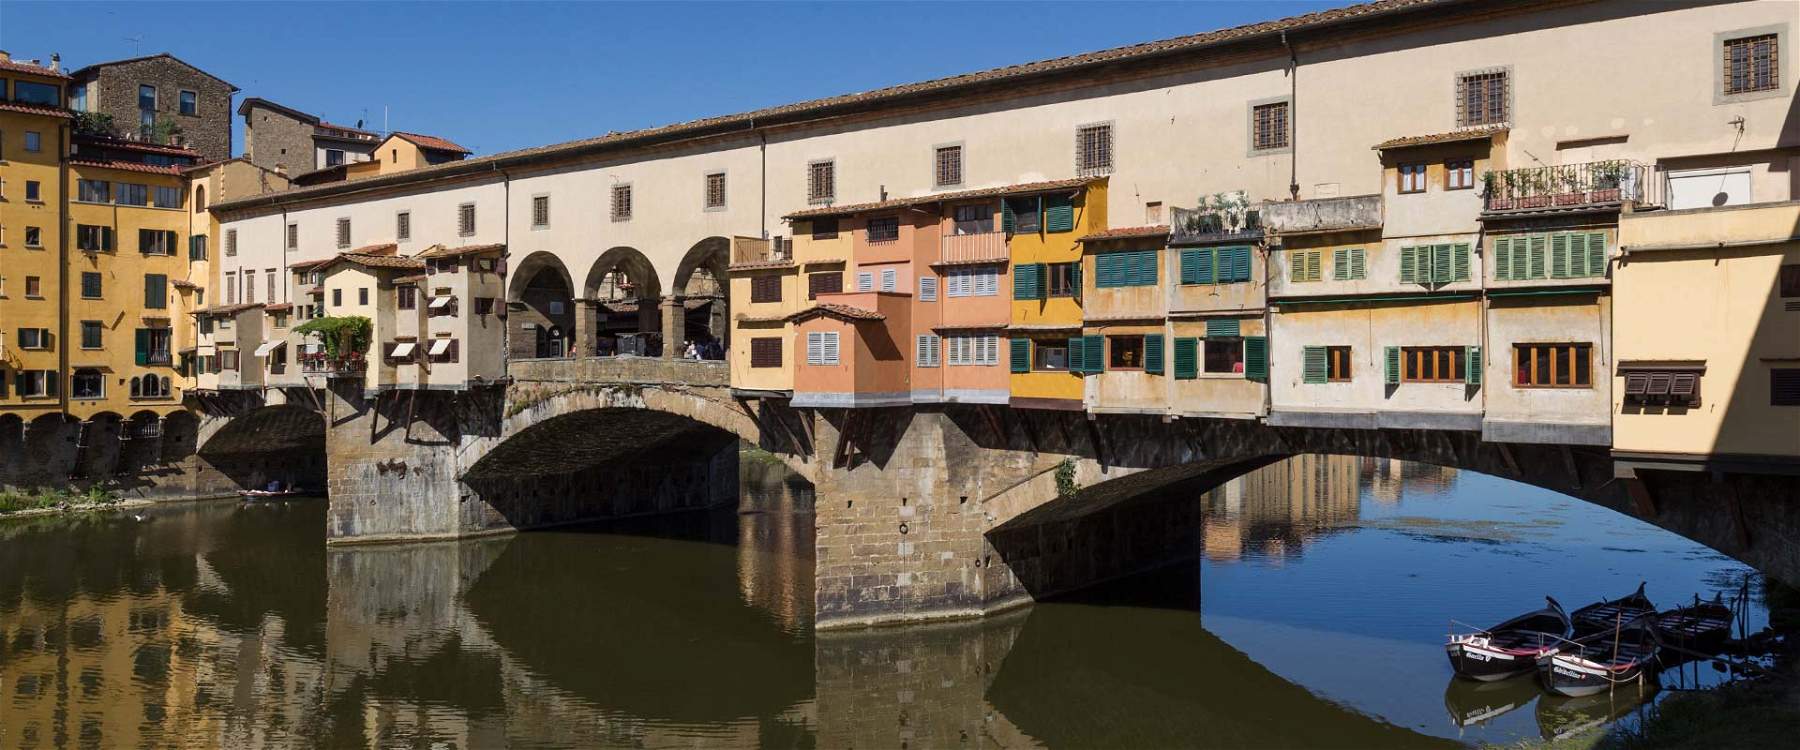 The Vasari Corridor, a different look at Florence